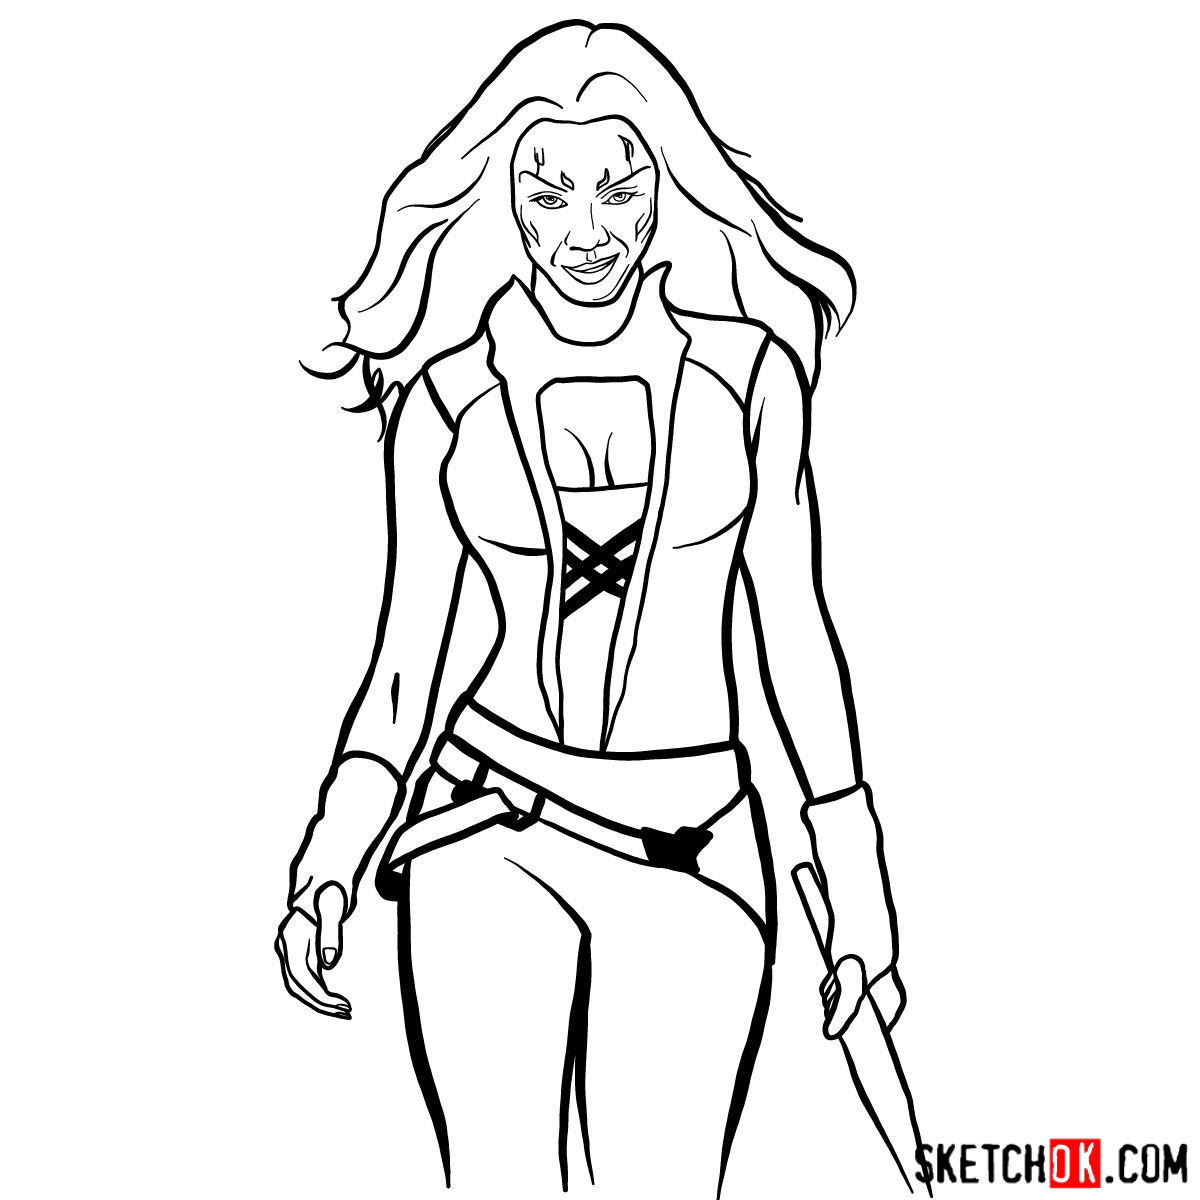 How to draw Gamora from Guardians of the Galaxy - Sketchok